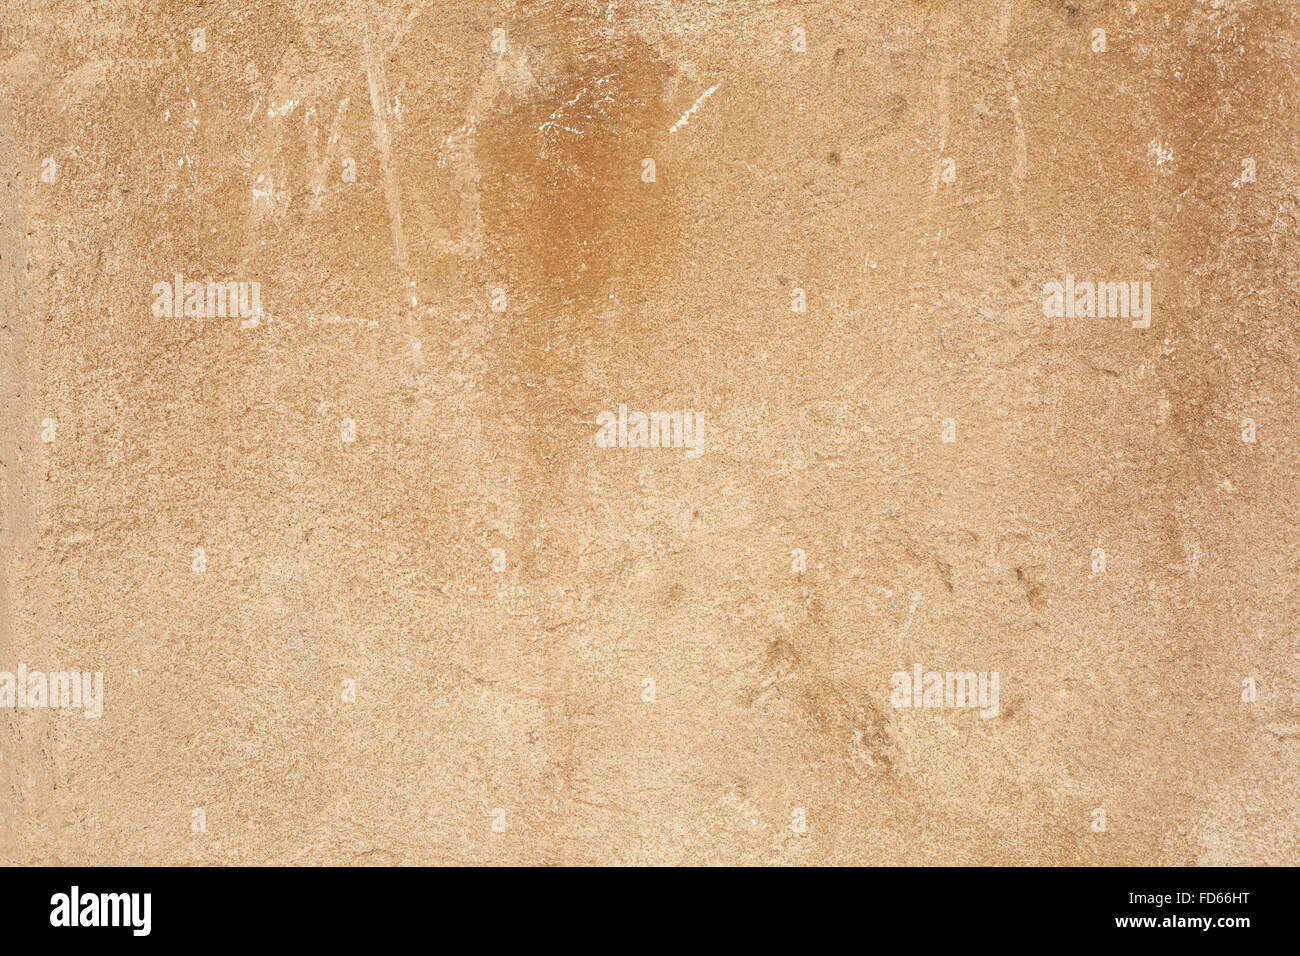 Beige, weathered wall texture background Banque D'Images